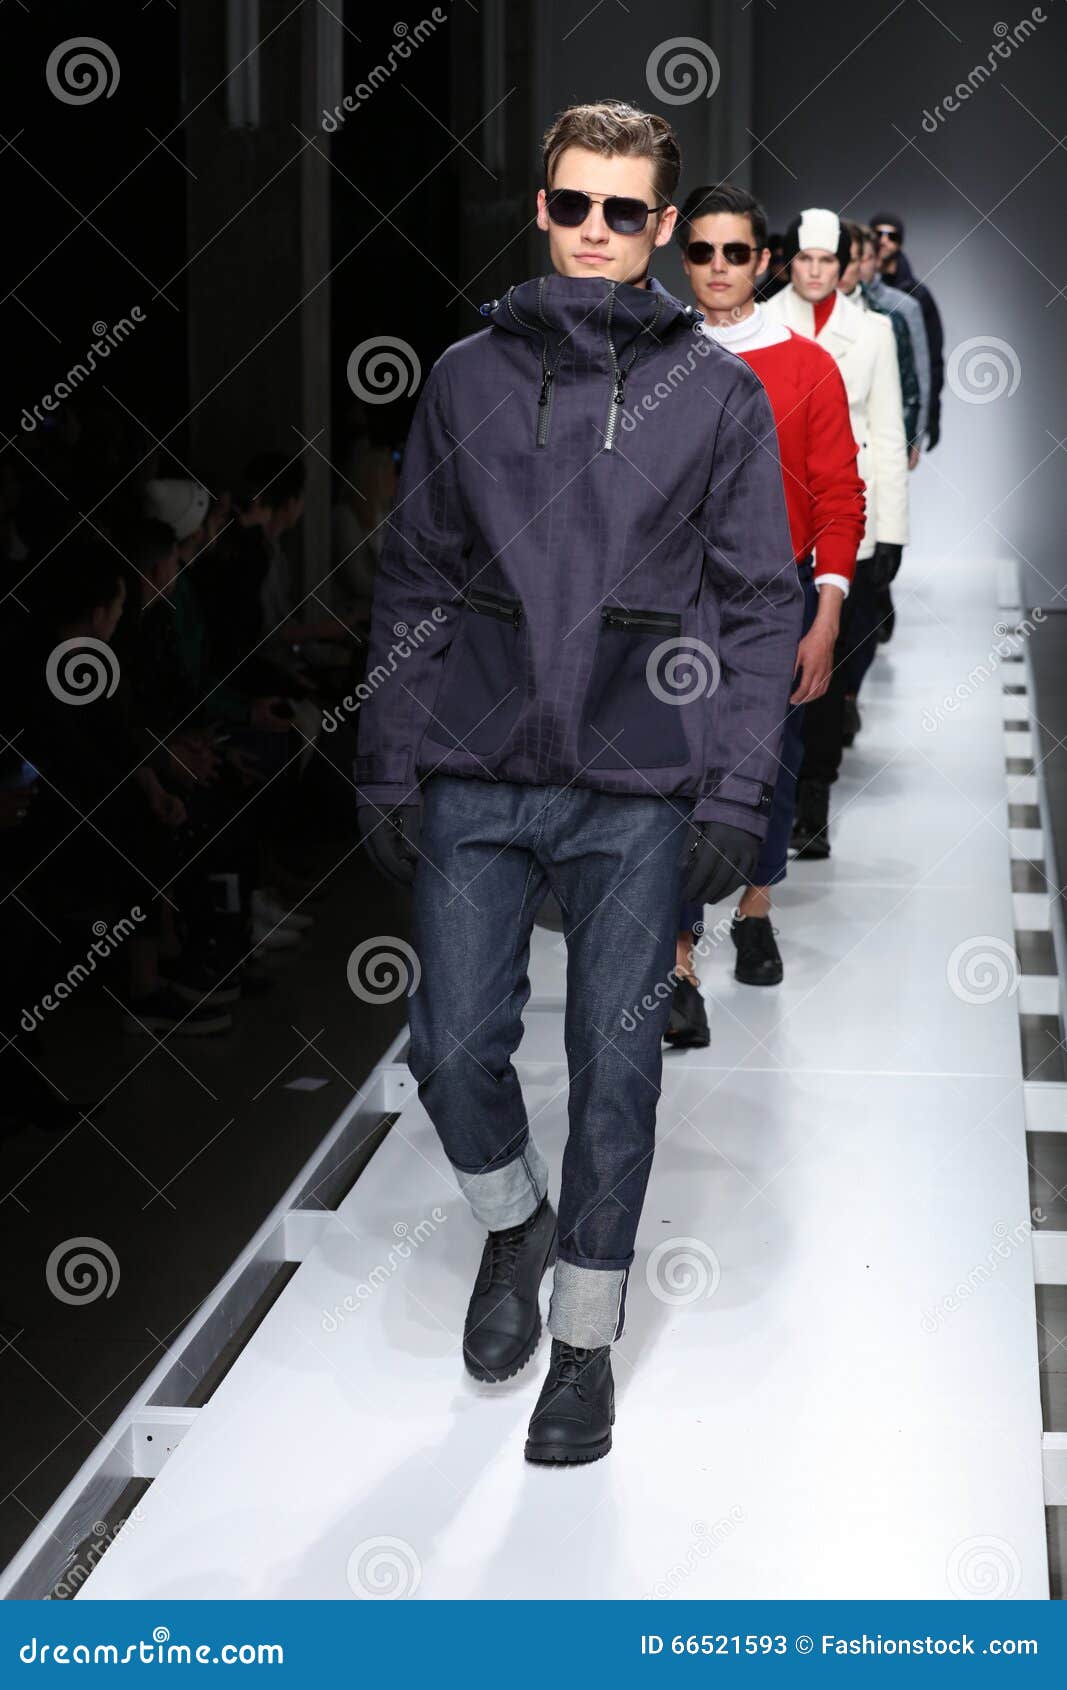 Models Walk the Runway Finale at the Nautica Men S Fall 2016 Fashion Show  Editorial Stock Photo - Image of york, wear: 66521593